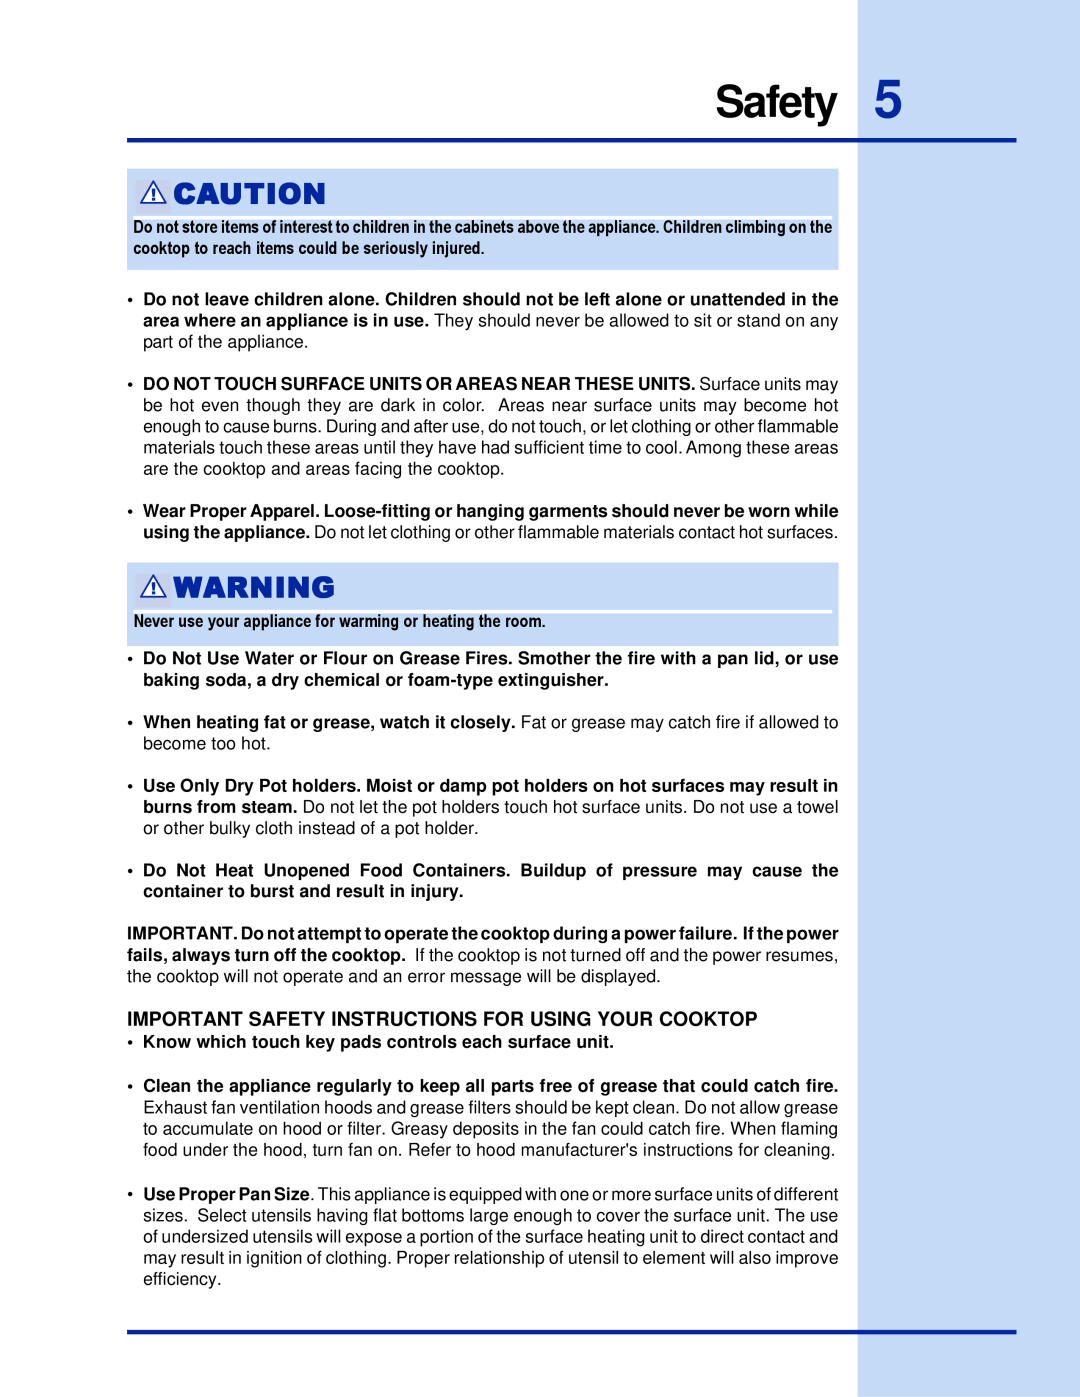 Electrolux 36 manual Important Safety Instructions For Using Your Cooktop 